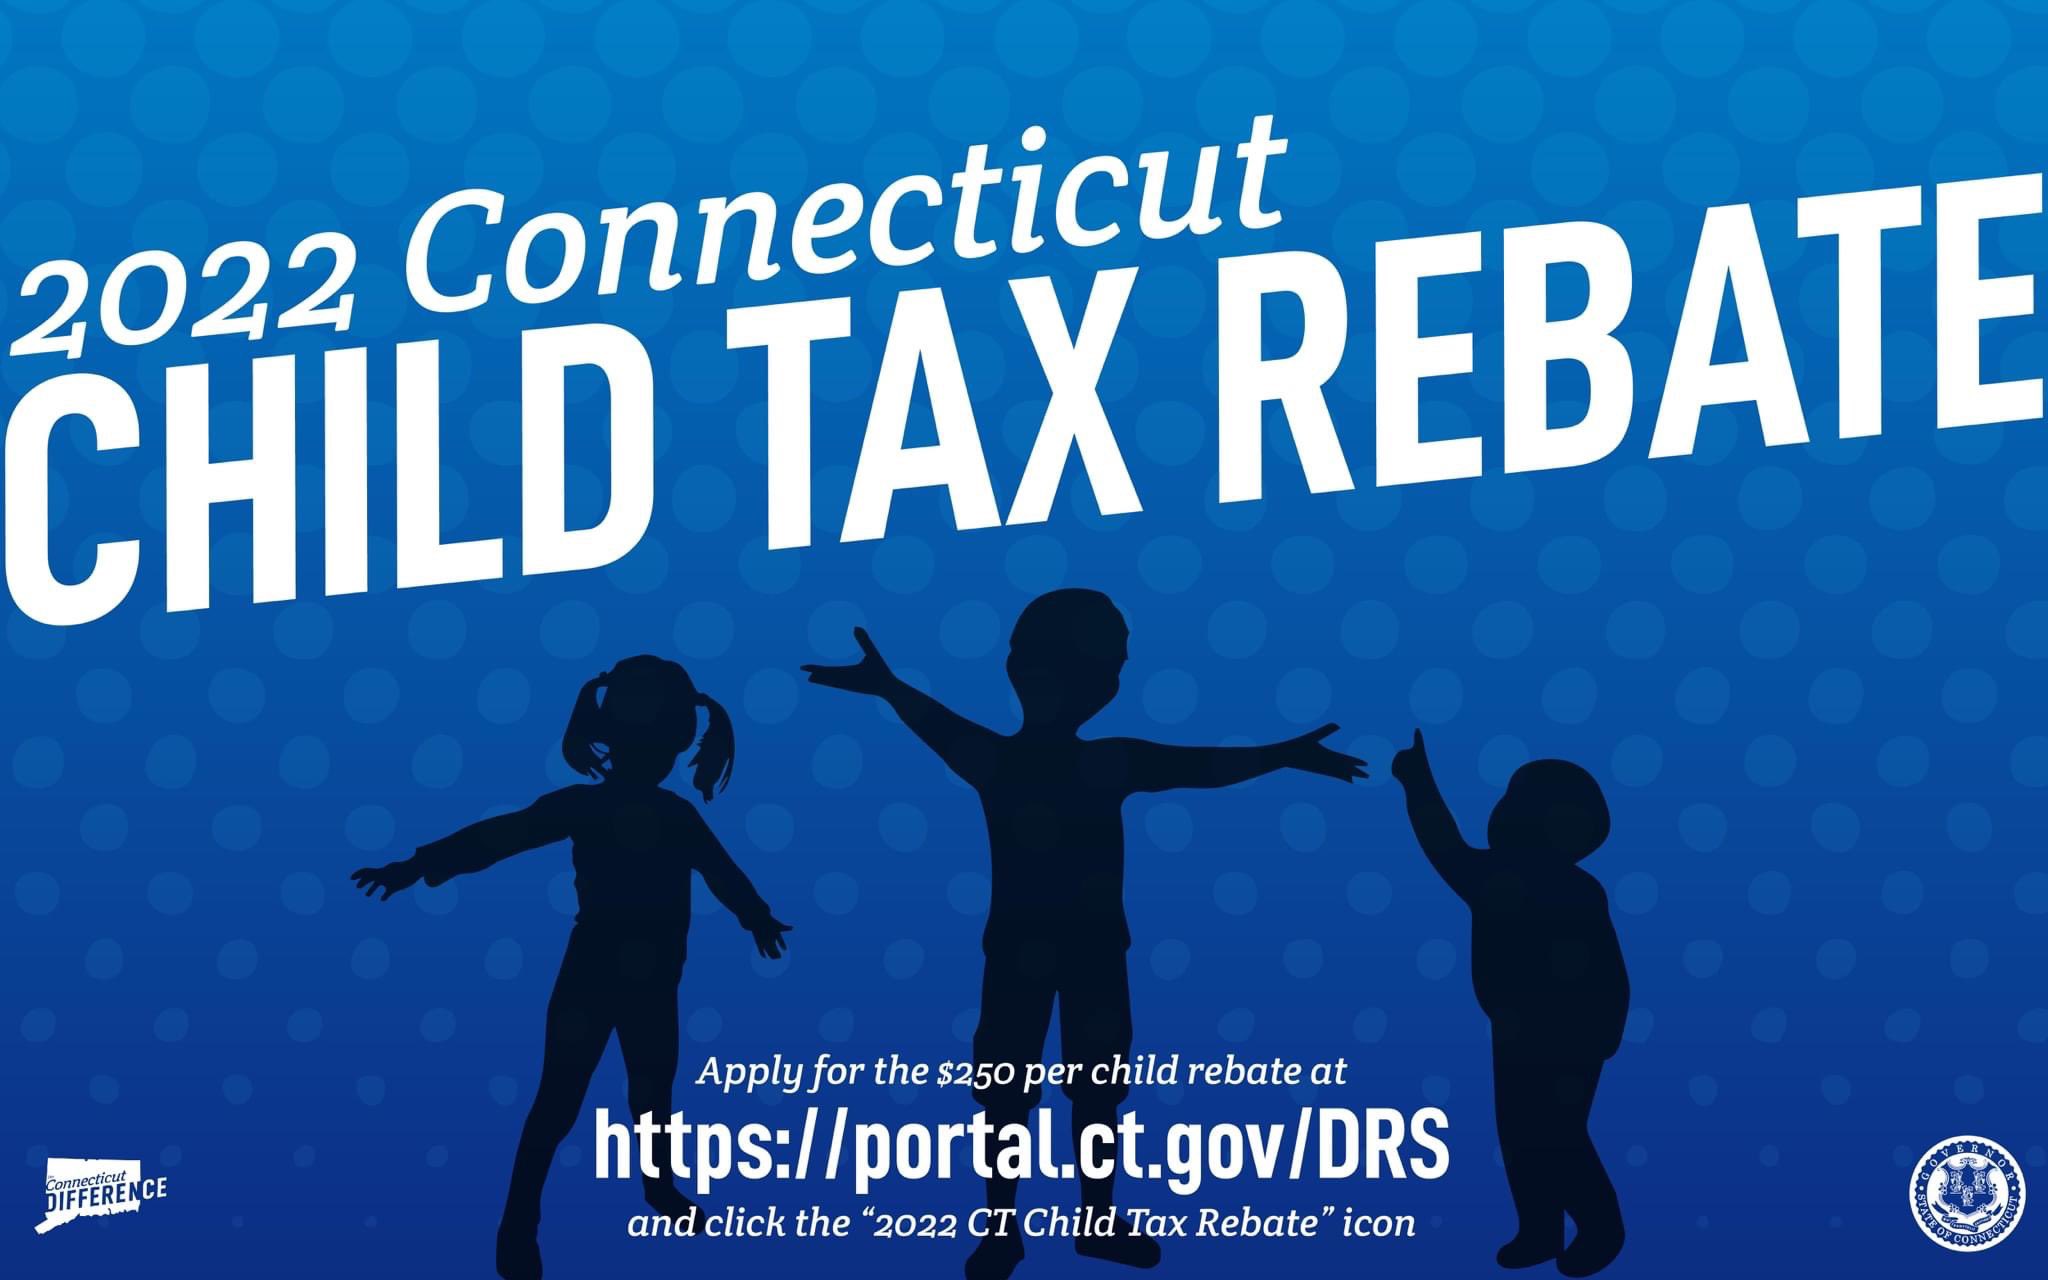 wisconsin-child-tax-rebate-returned-more-than-94-million-to-families